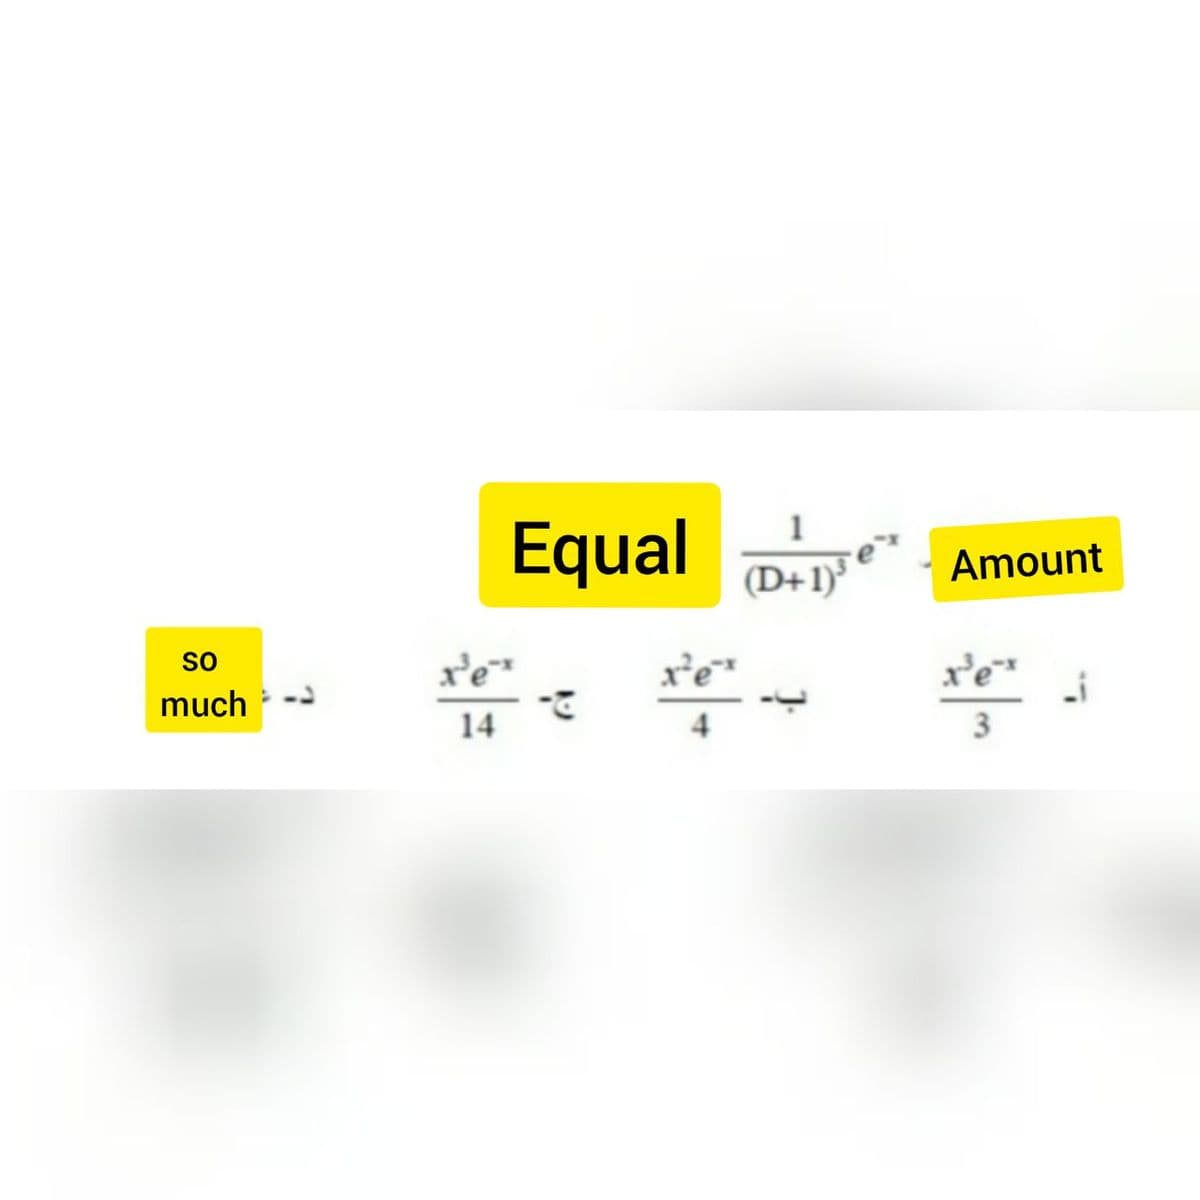 1
Equal
(D+1)³
Amount
so
much
xe
x'e
r'e"
14
